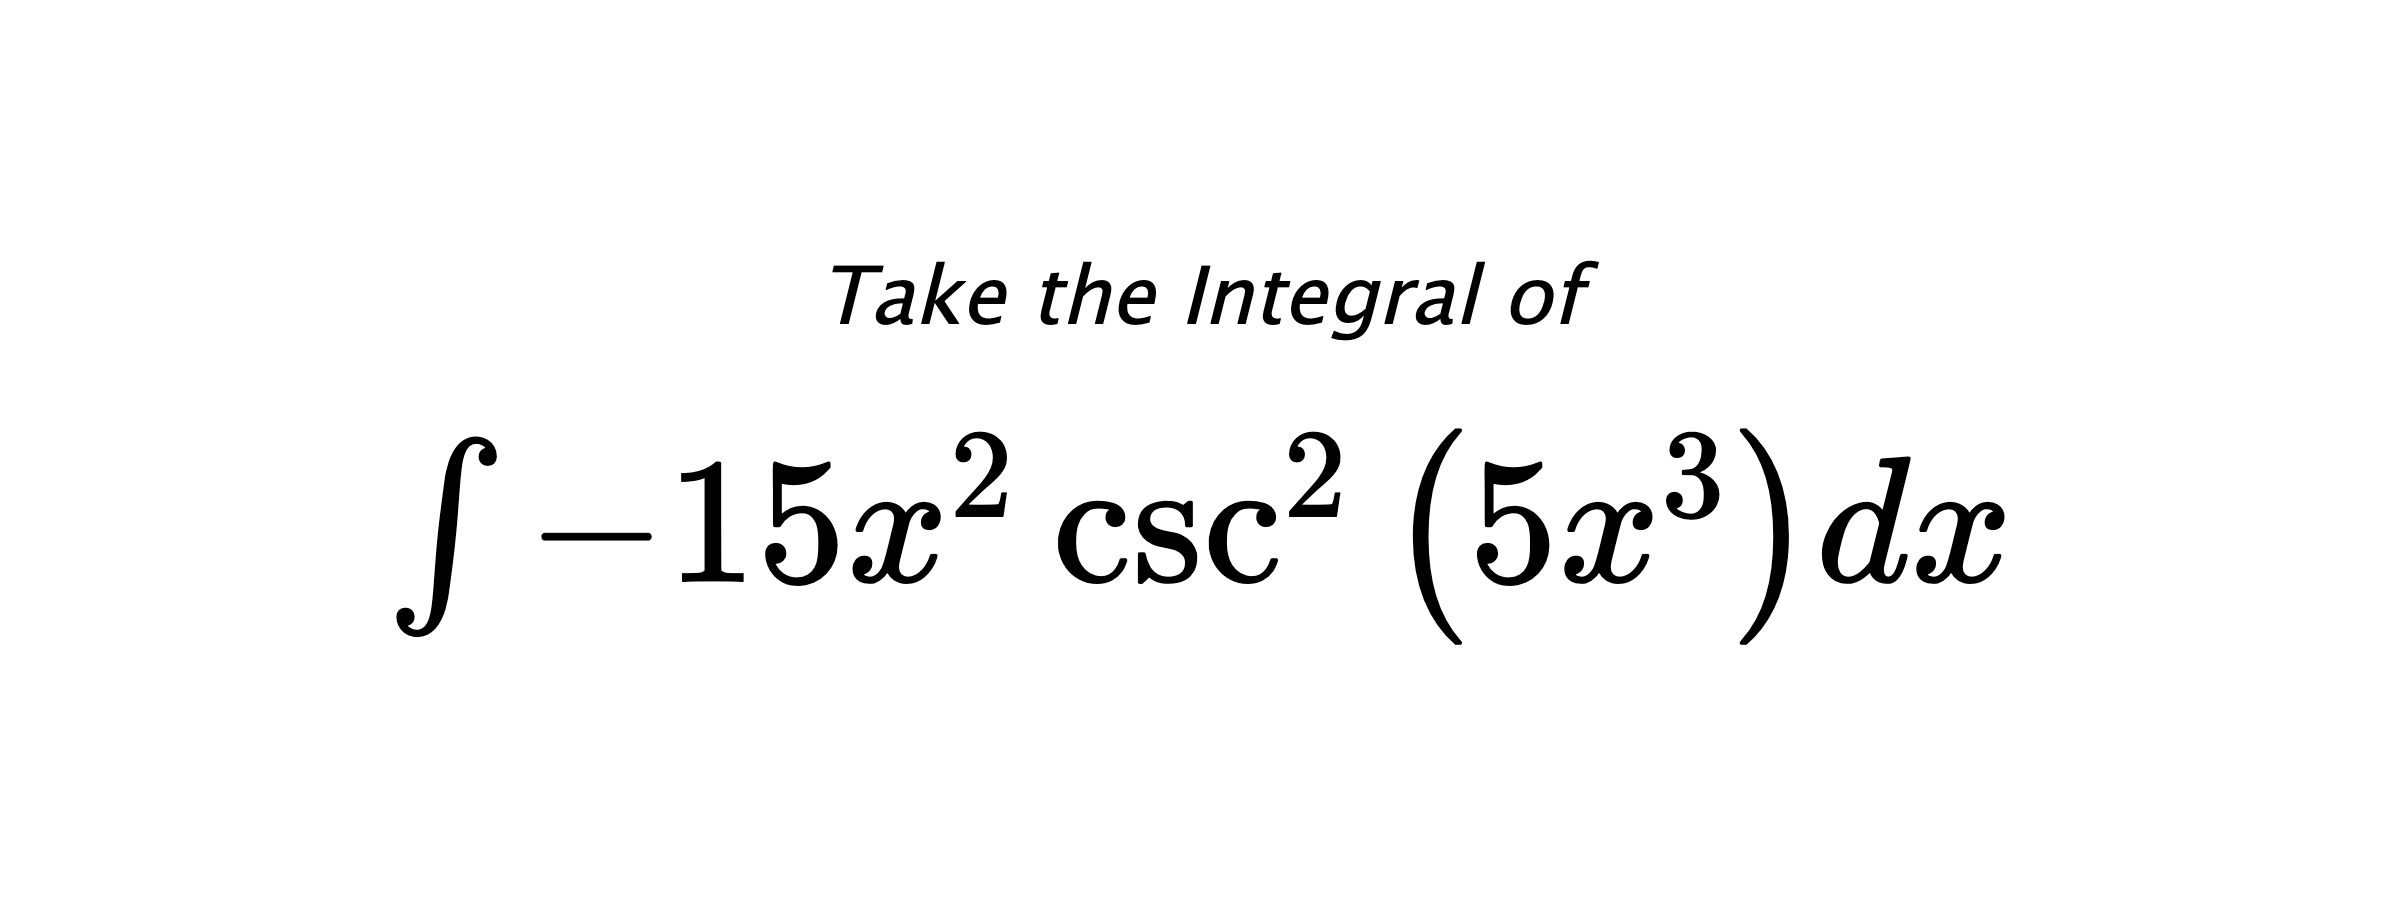 Take the Integral of $ \int - 15 x^{2} \csc^{2}{\left(5 x^{3} \right)} dx $